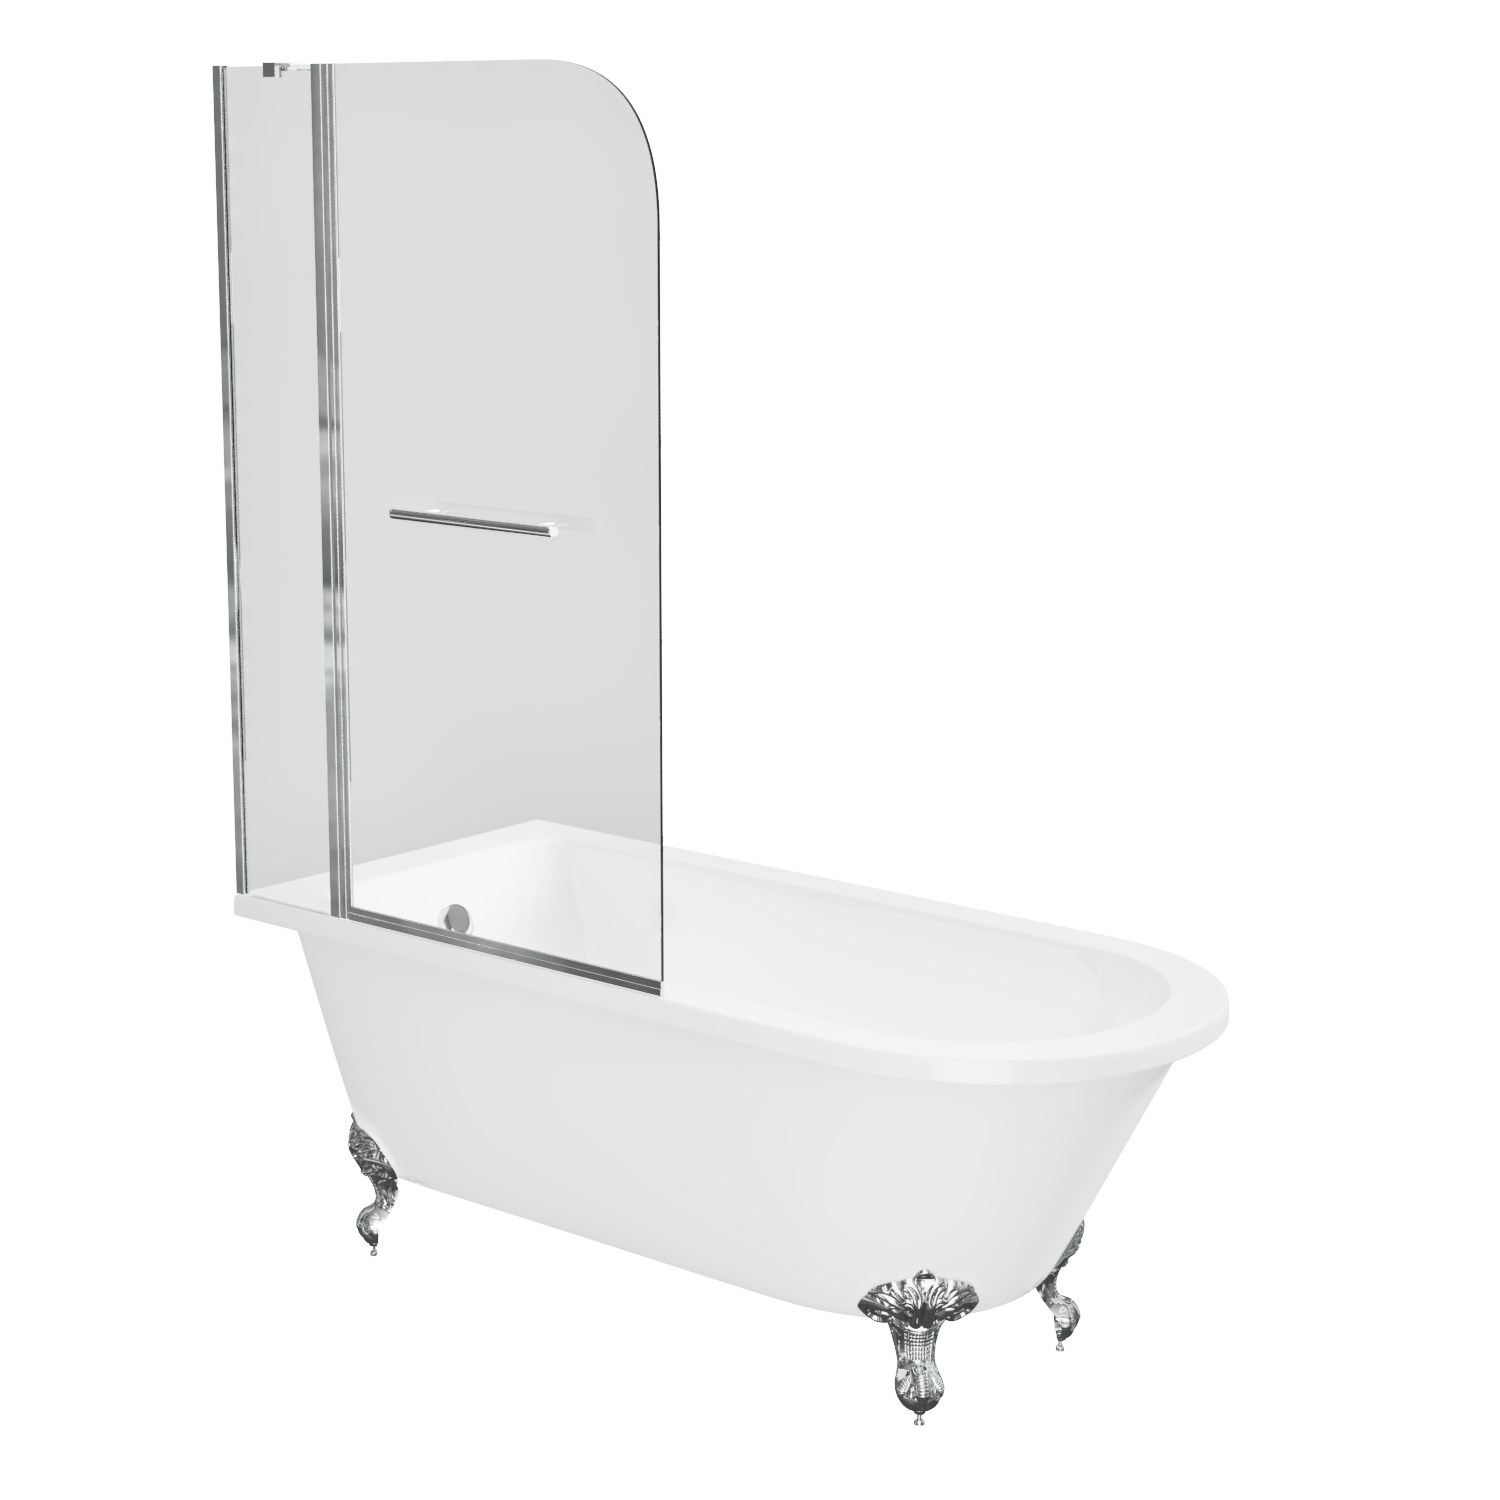 Freestanding Double Ended Bath 1615 x 720mm - Porto - Furniture123